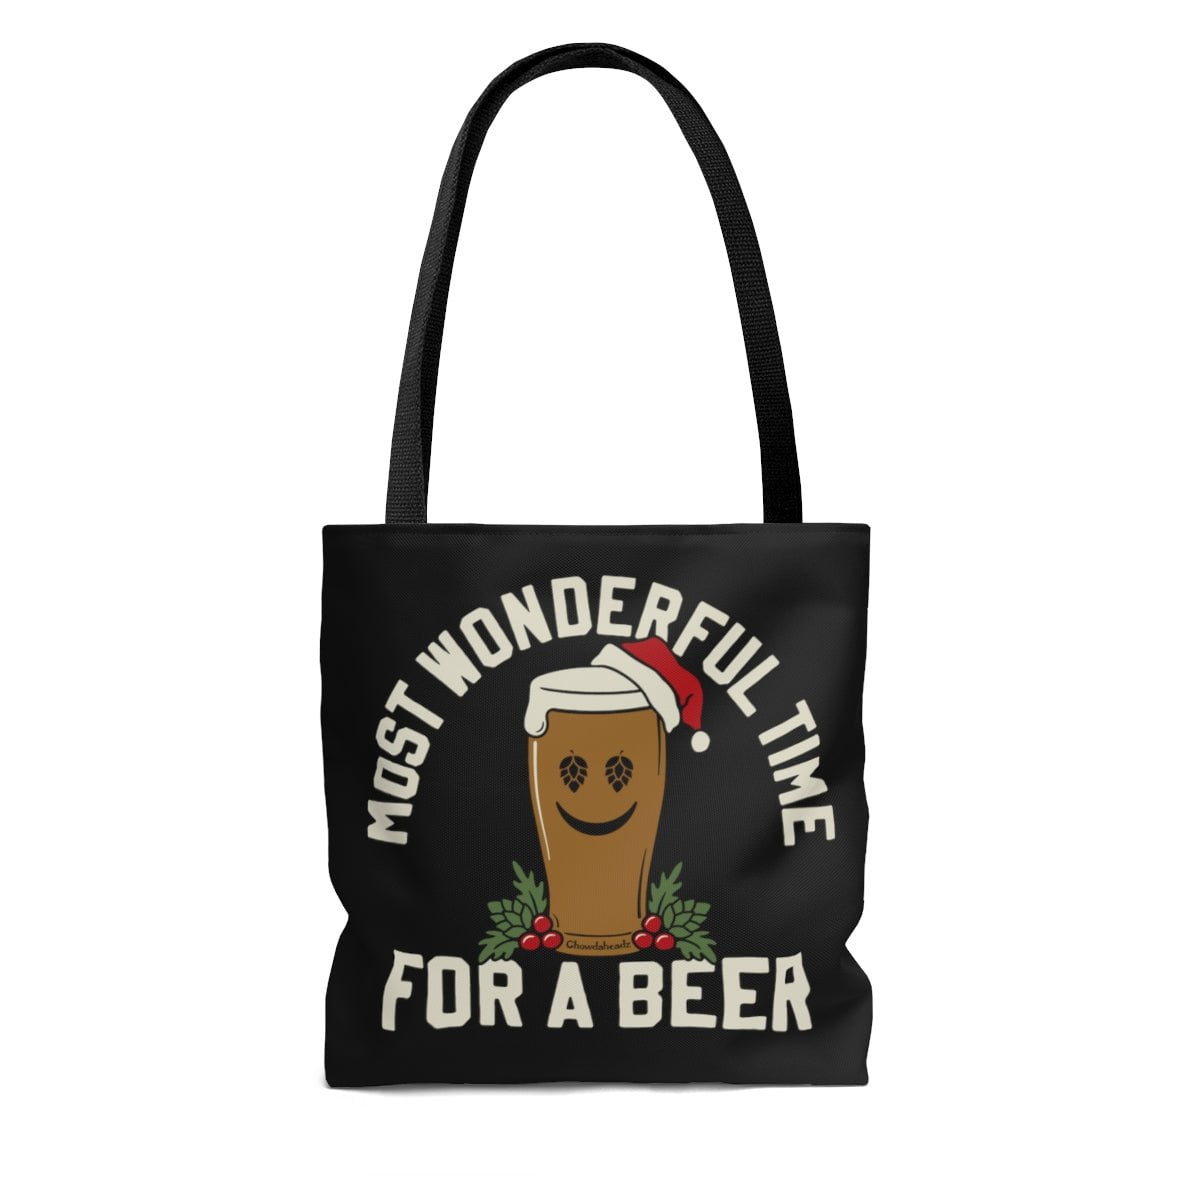 Most Wonderful Time For A Beer Tote Bag - Chowdaheadz